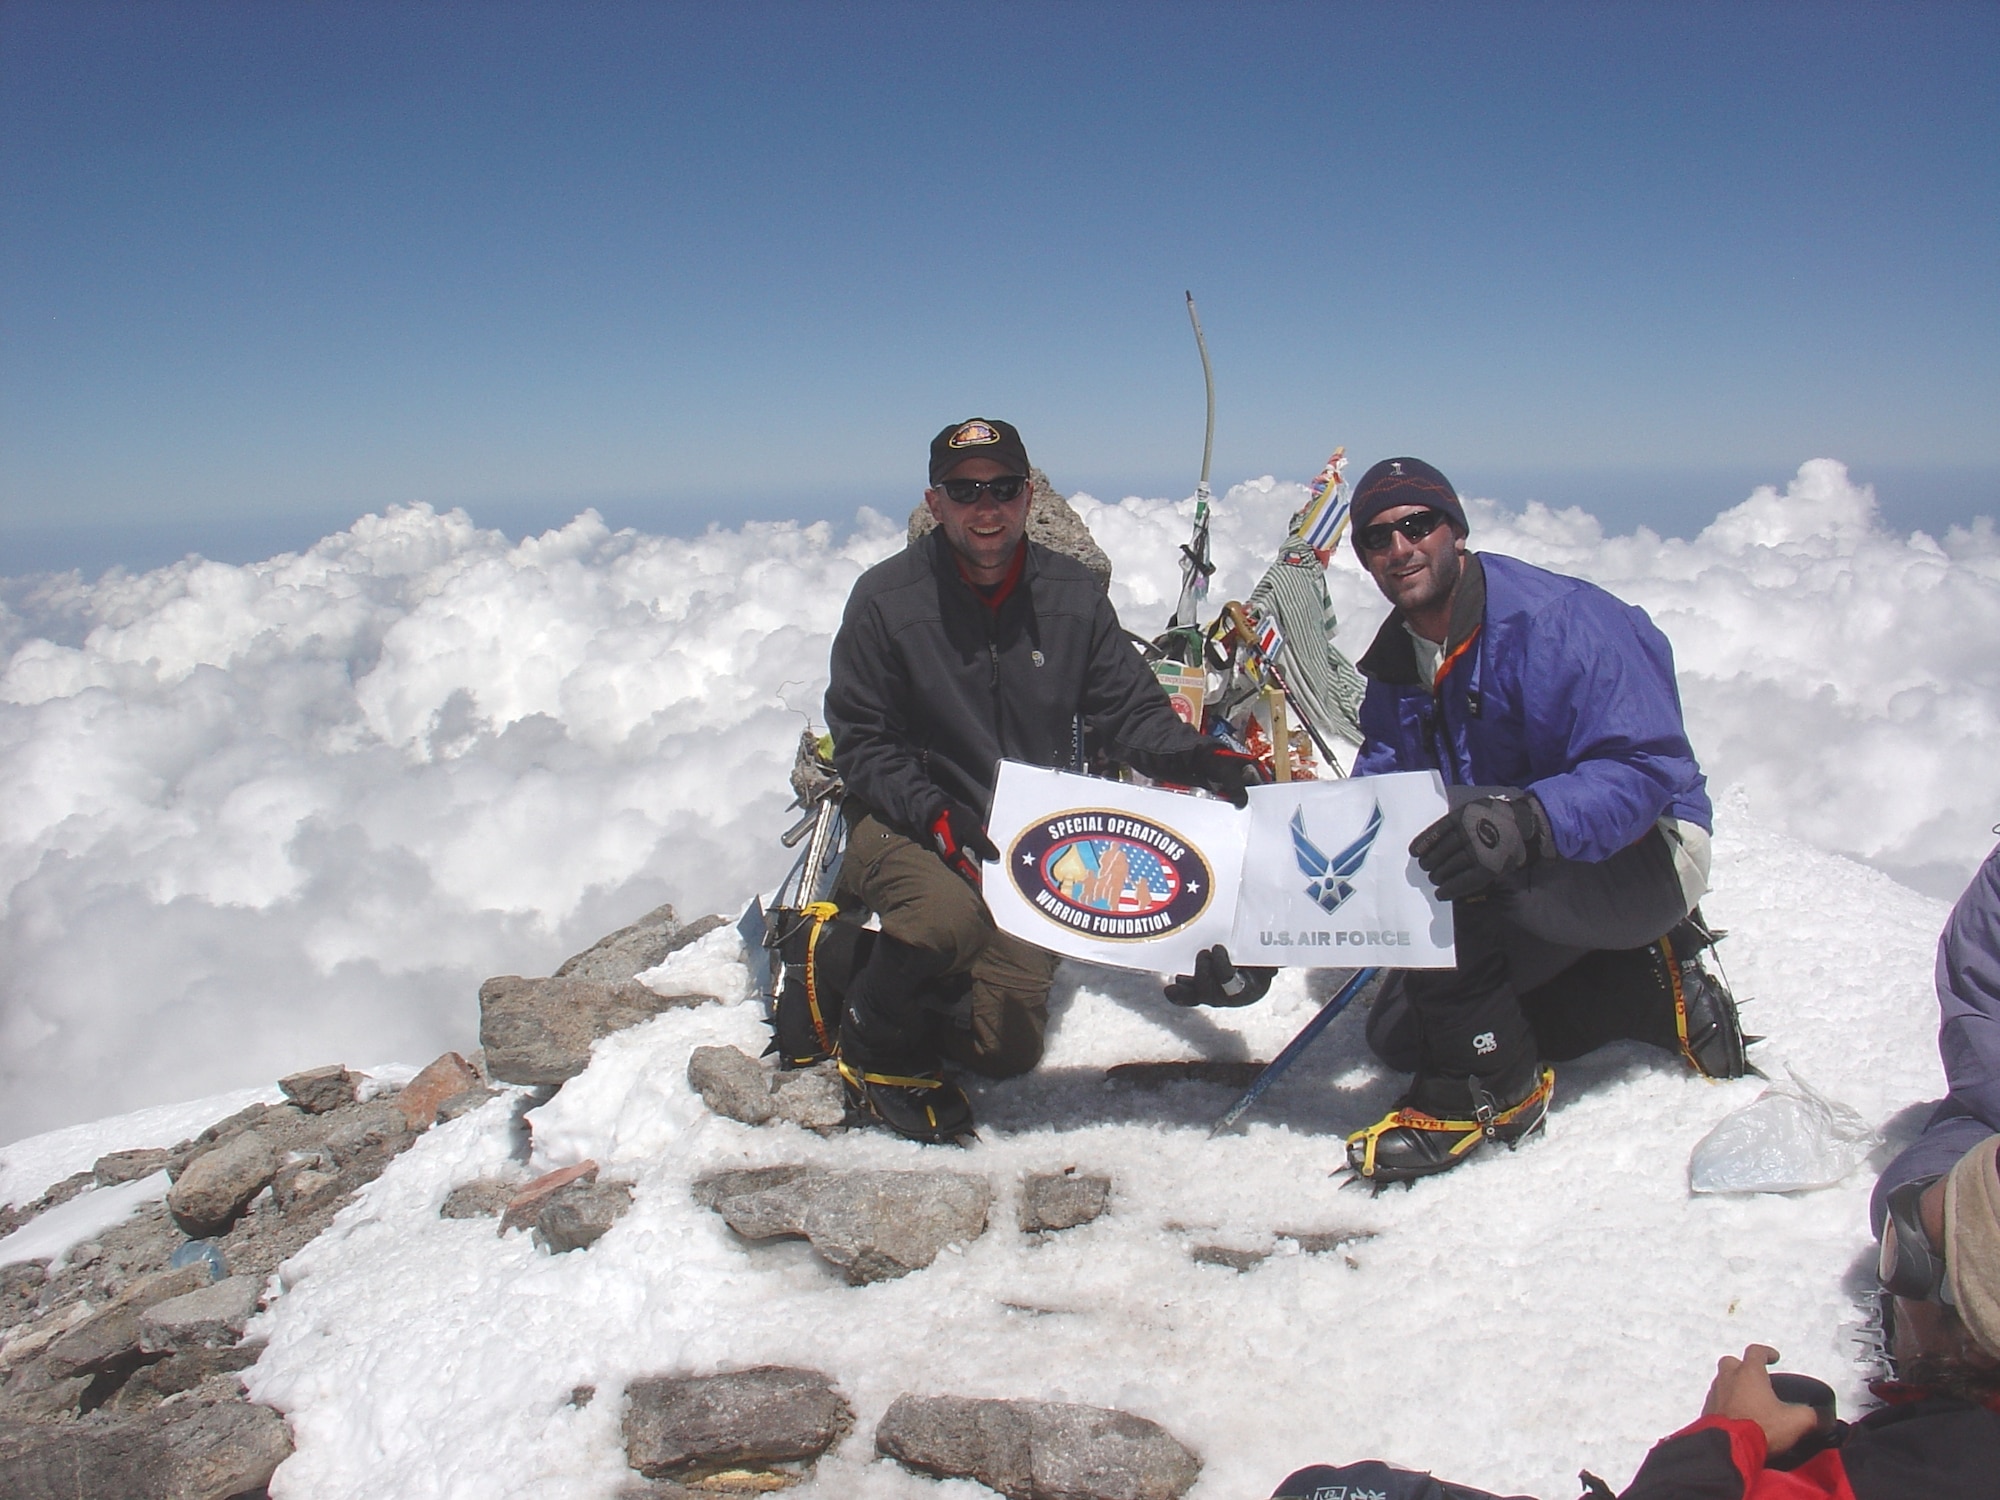 Capt. Rob Marshall, 8th Special Operations Squadron, and then 1st Lt. Mark Uberuaga, 55th Rescue Squadron, display the Air Force and Special Operations Warrior Foundation logos at the summit of Russia’s Mount Elbrus in July 2005. The Airmen founded the U.S. Air Force Seven Summits Challenge, which aims to lead a team of Air Force members to the top of the highest mountain on each continent. Mount Elbrus, the tallest peak in Europe at 18,510 ft., was the group’s inaugural climb. (U.S. Air Force photo)